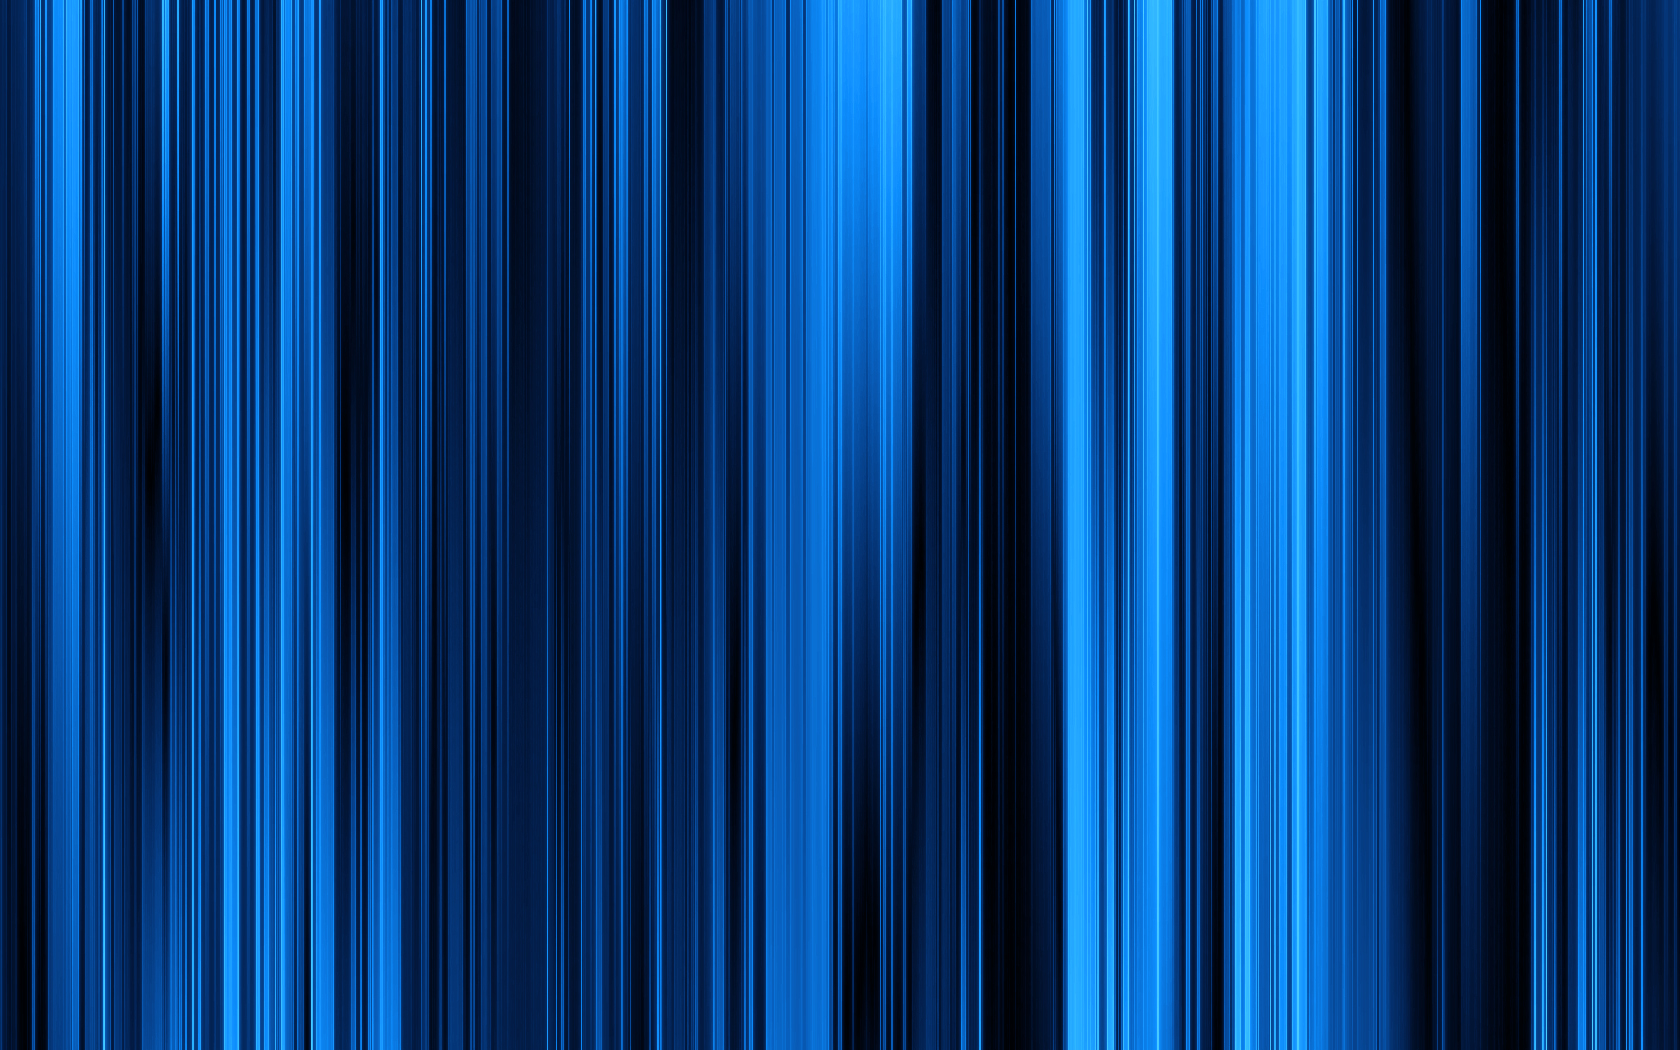 Blue Stripes by SxyfrG on